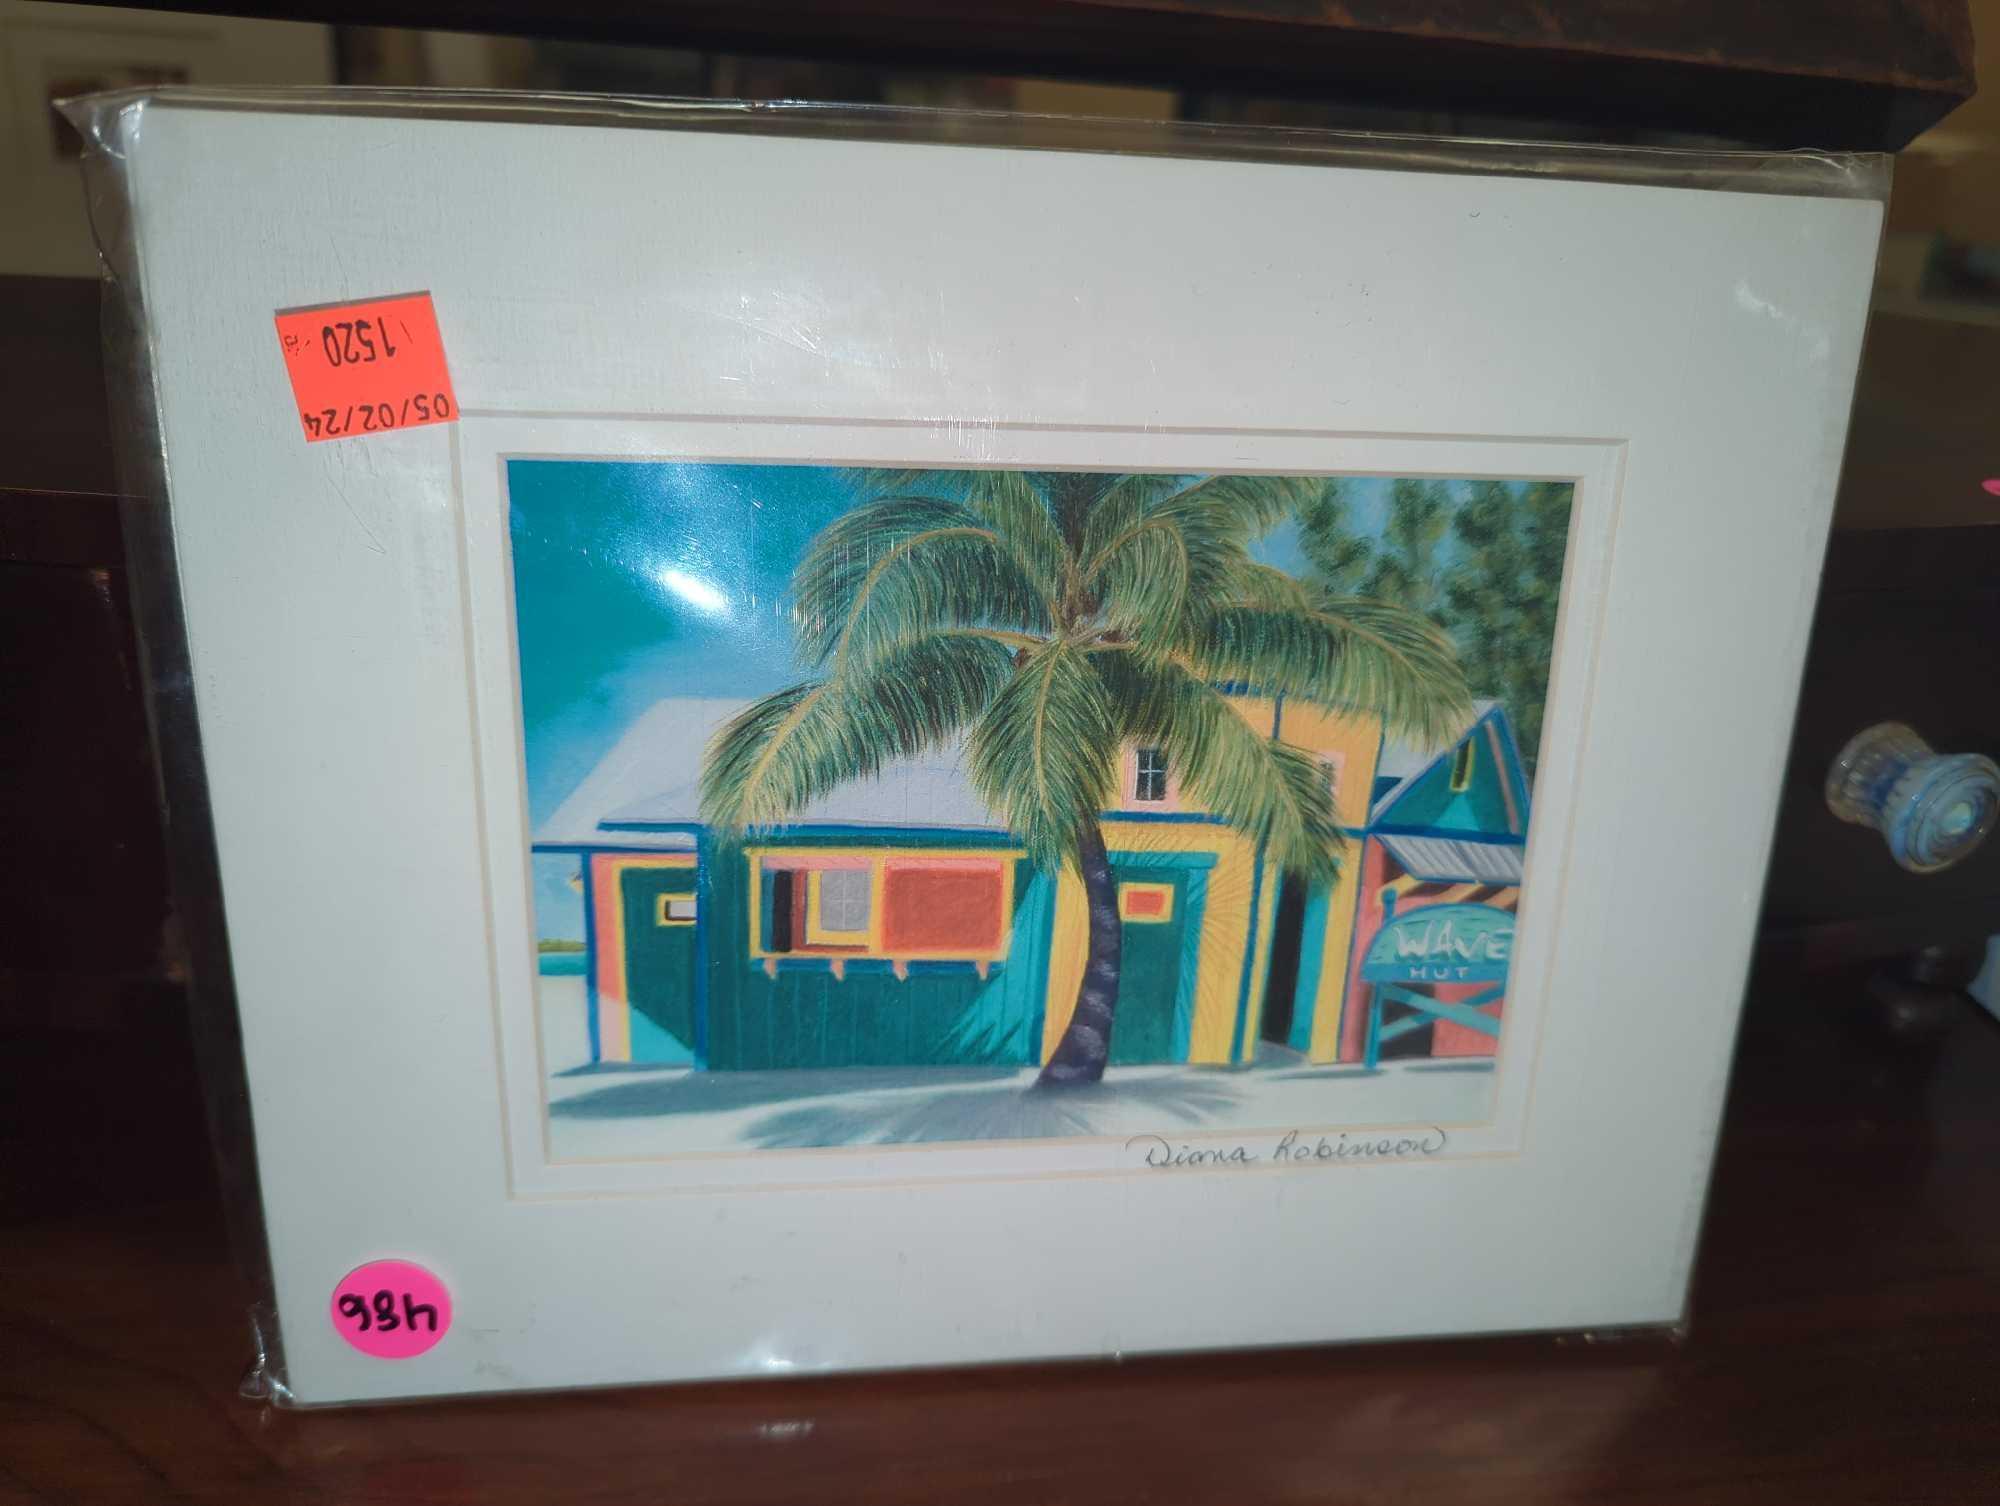 Framed Print of "Palm Tree Boogie Woogie" by Diana Robinson, Approximate Dimensions - 10" x 8",